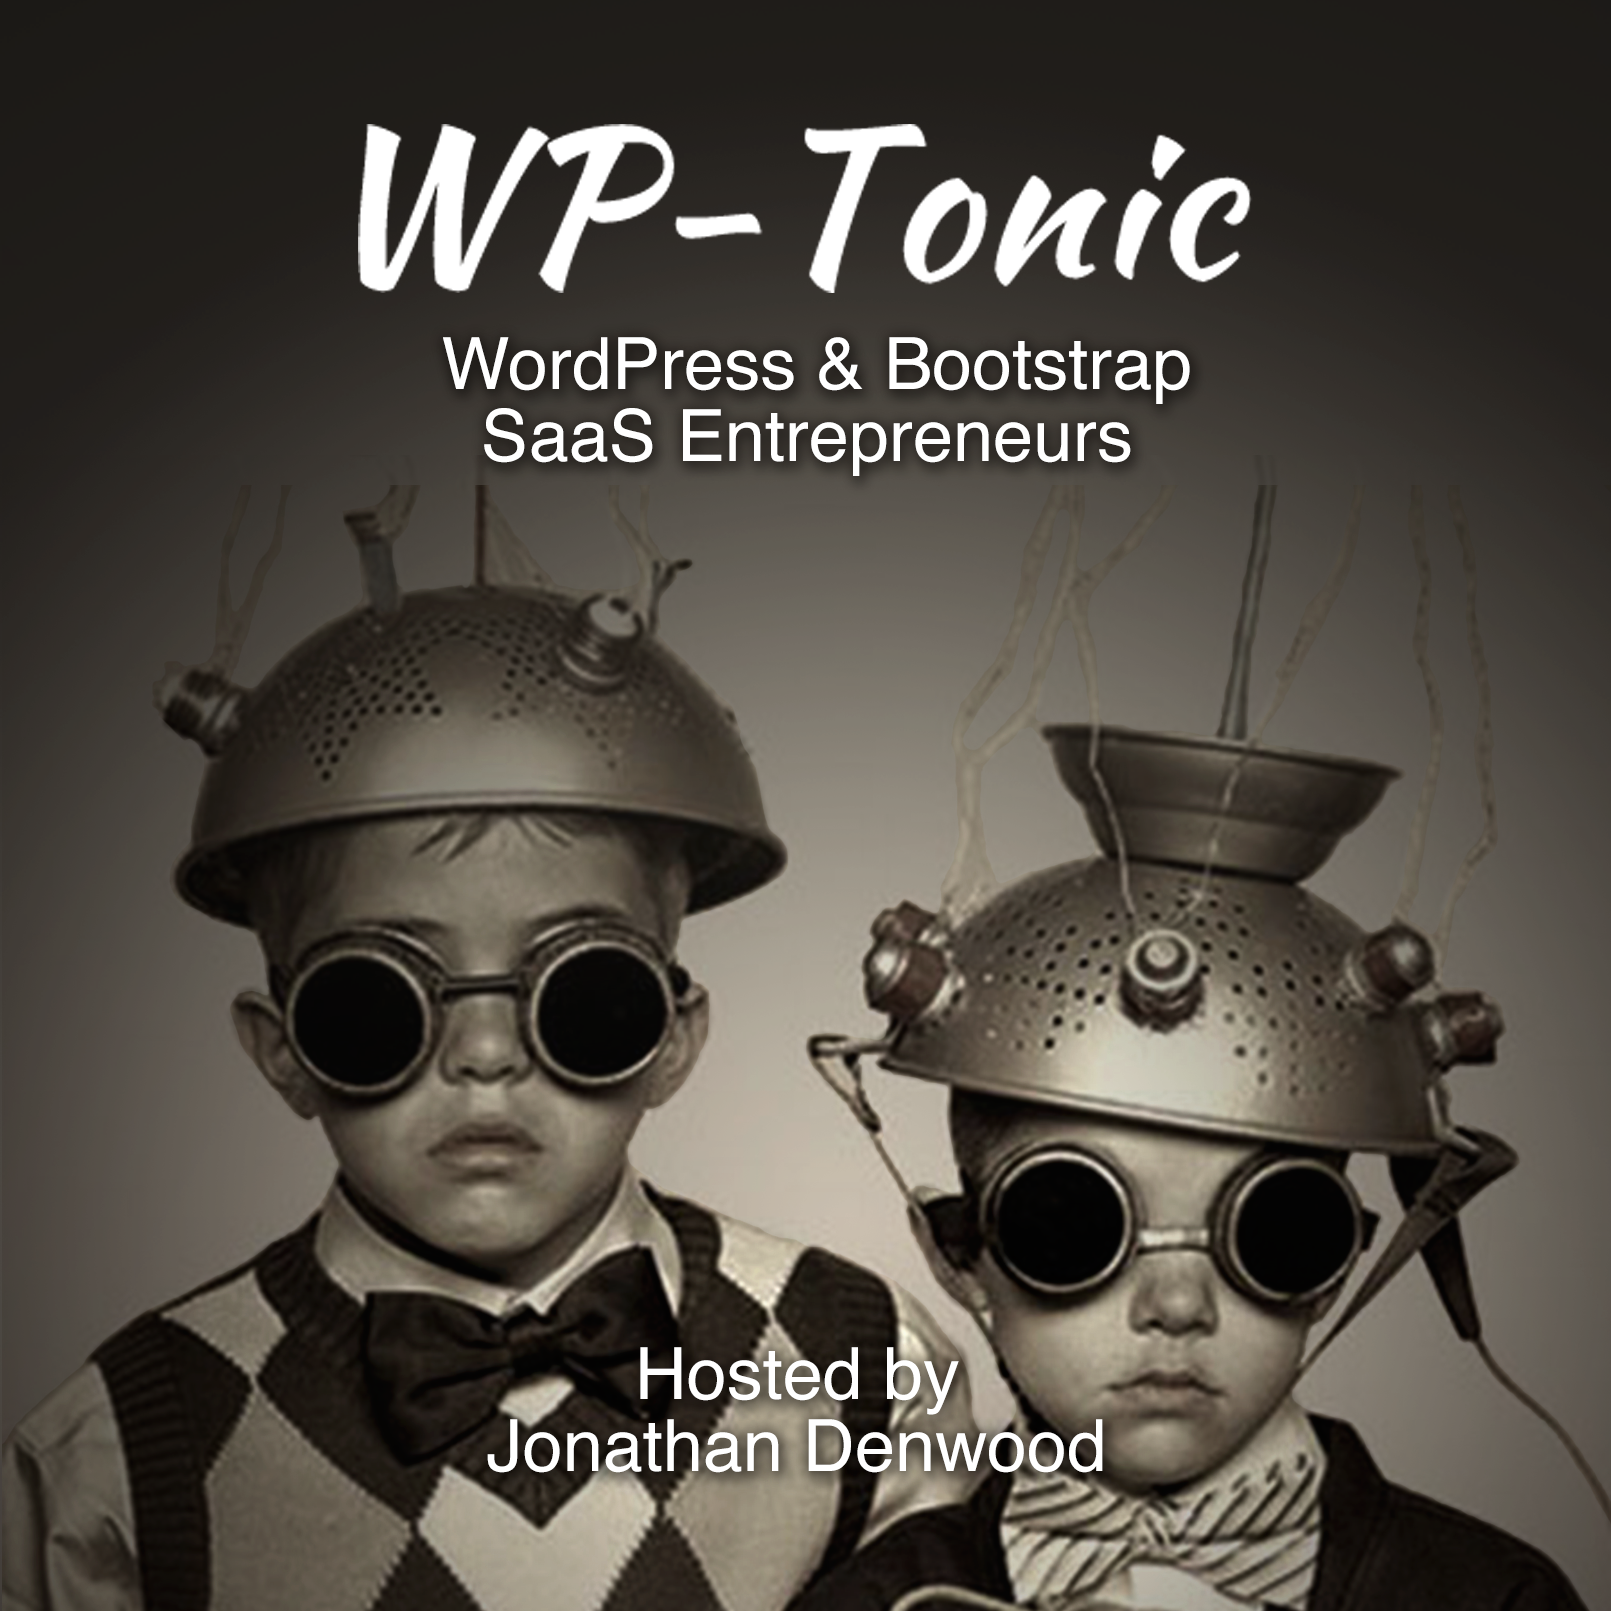 #714 WP-Tonic "This Week In WordPress & Tech" 29th of July, 2022 at 8:30 am PST 